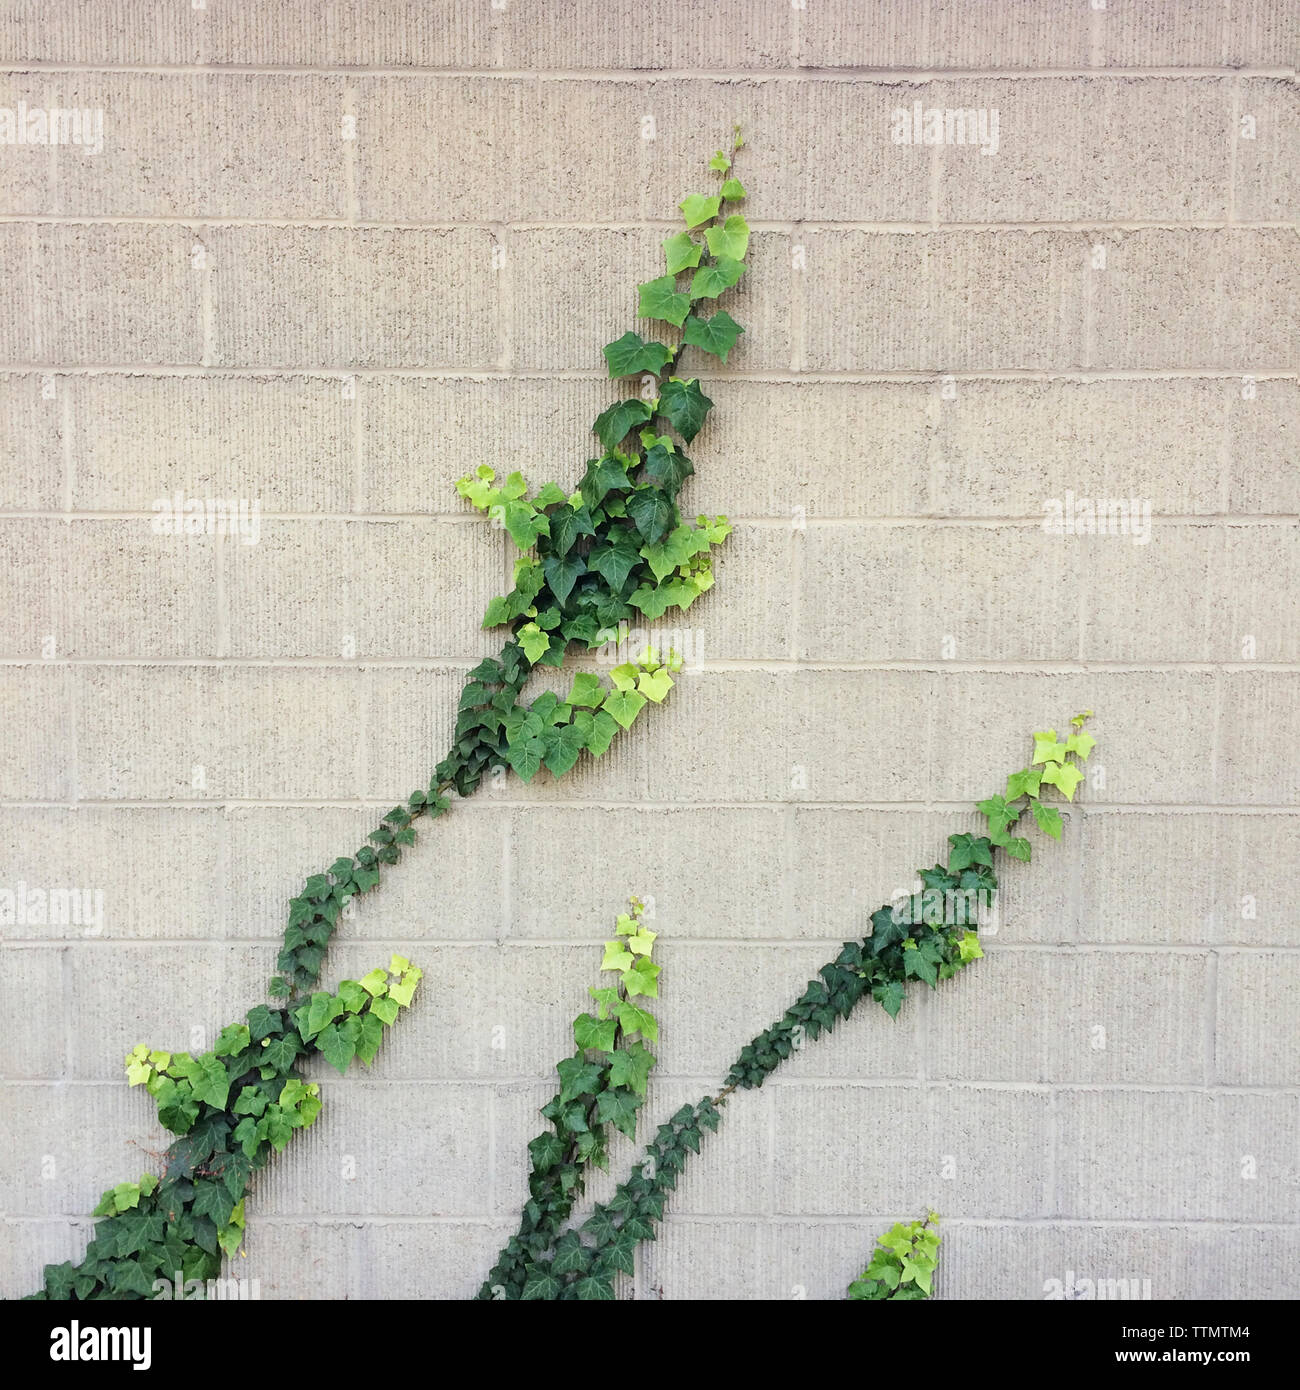 Green ivy growing on wall Stock Photo